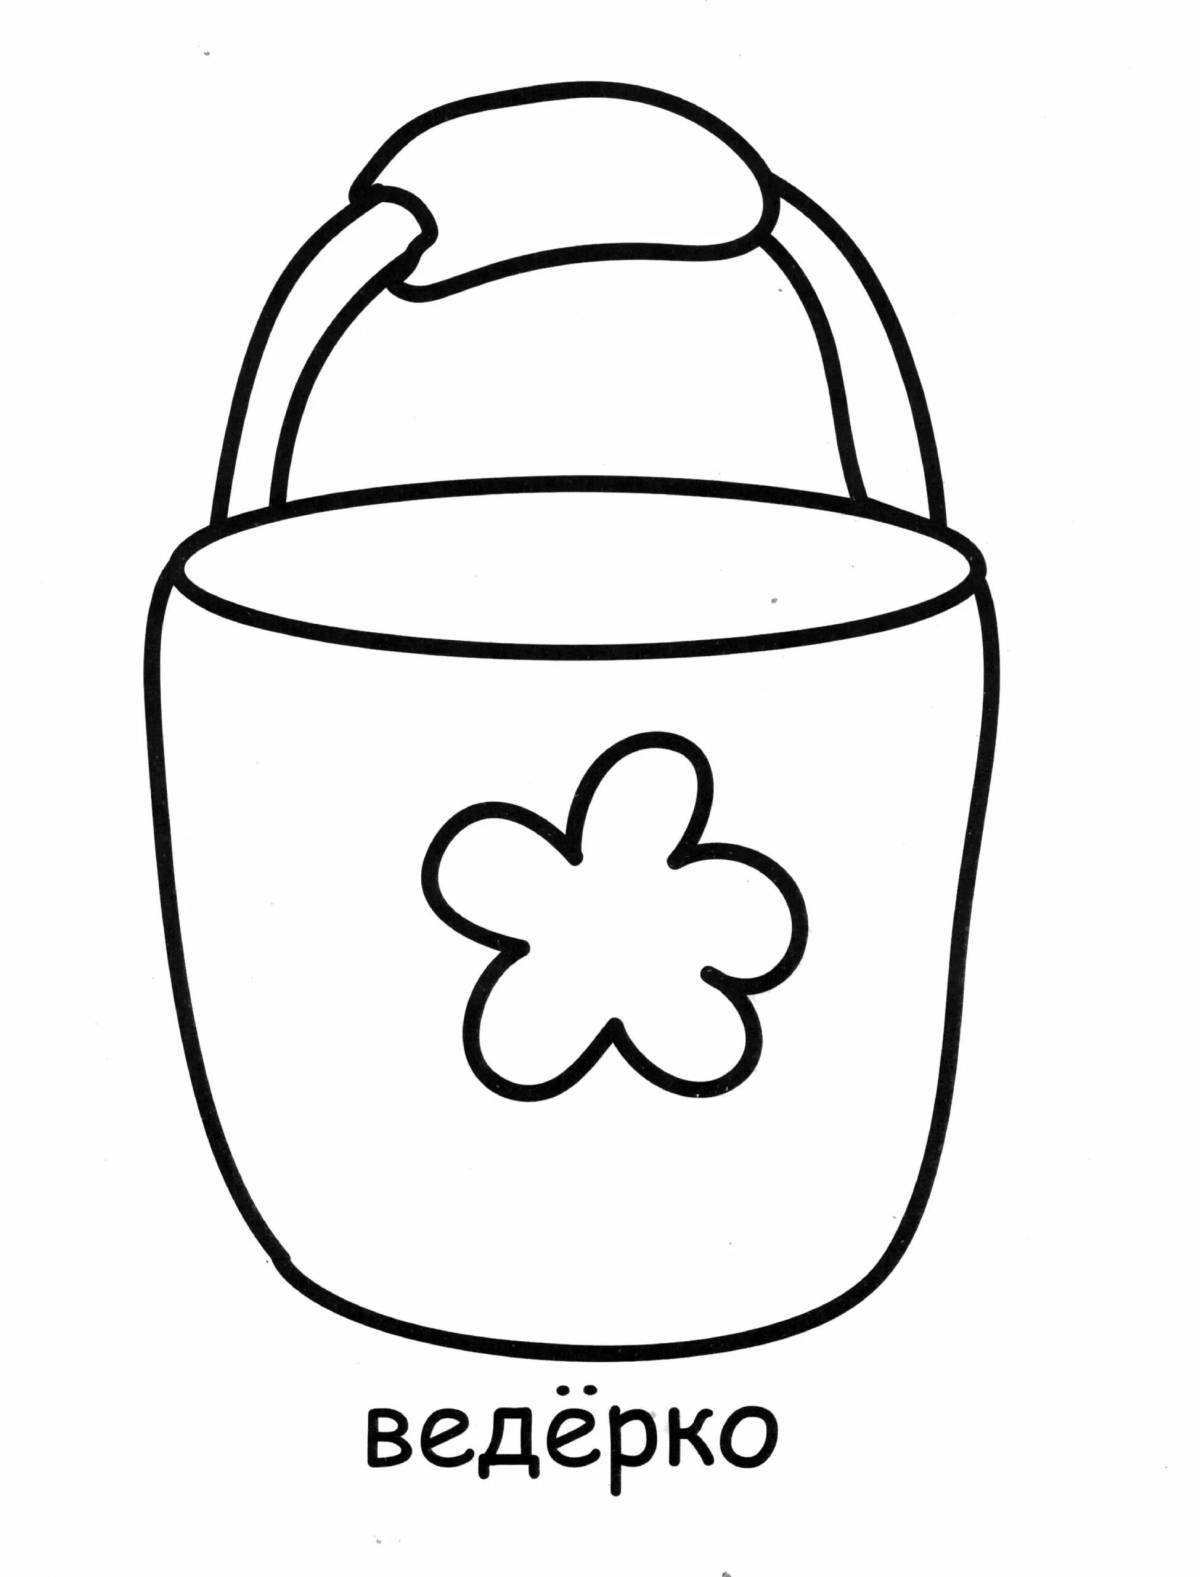 Colourful coloring pages for little students